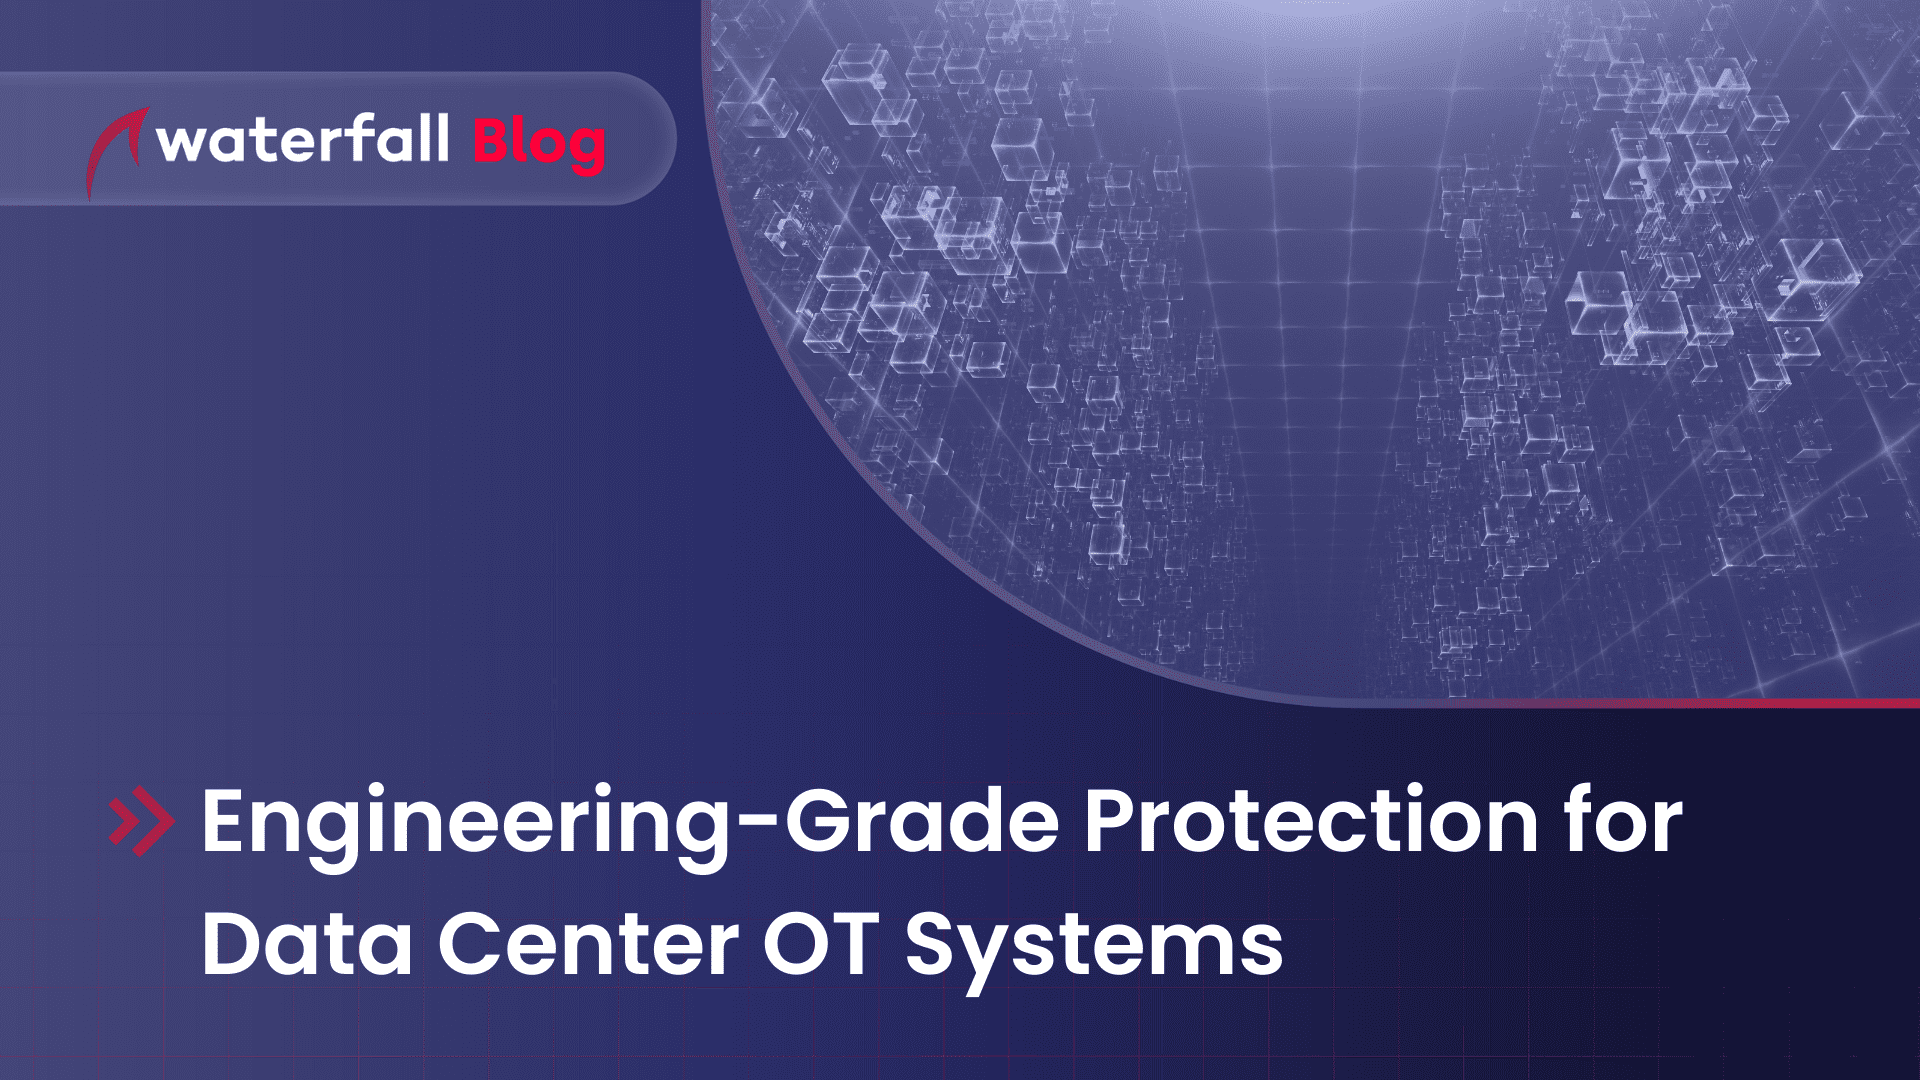 Engineering Grade Protection for Data Center OT Systems by Andrew Ginter, VP Industrial Security